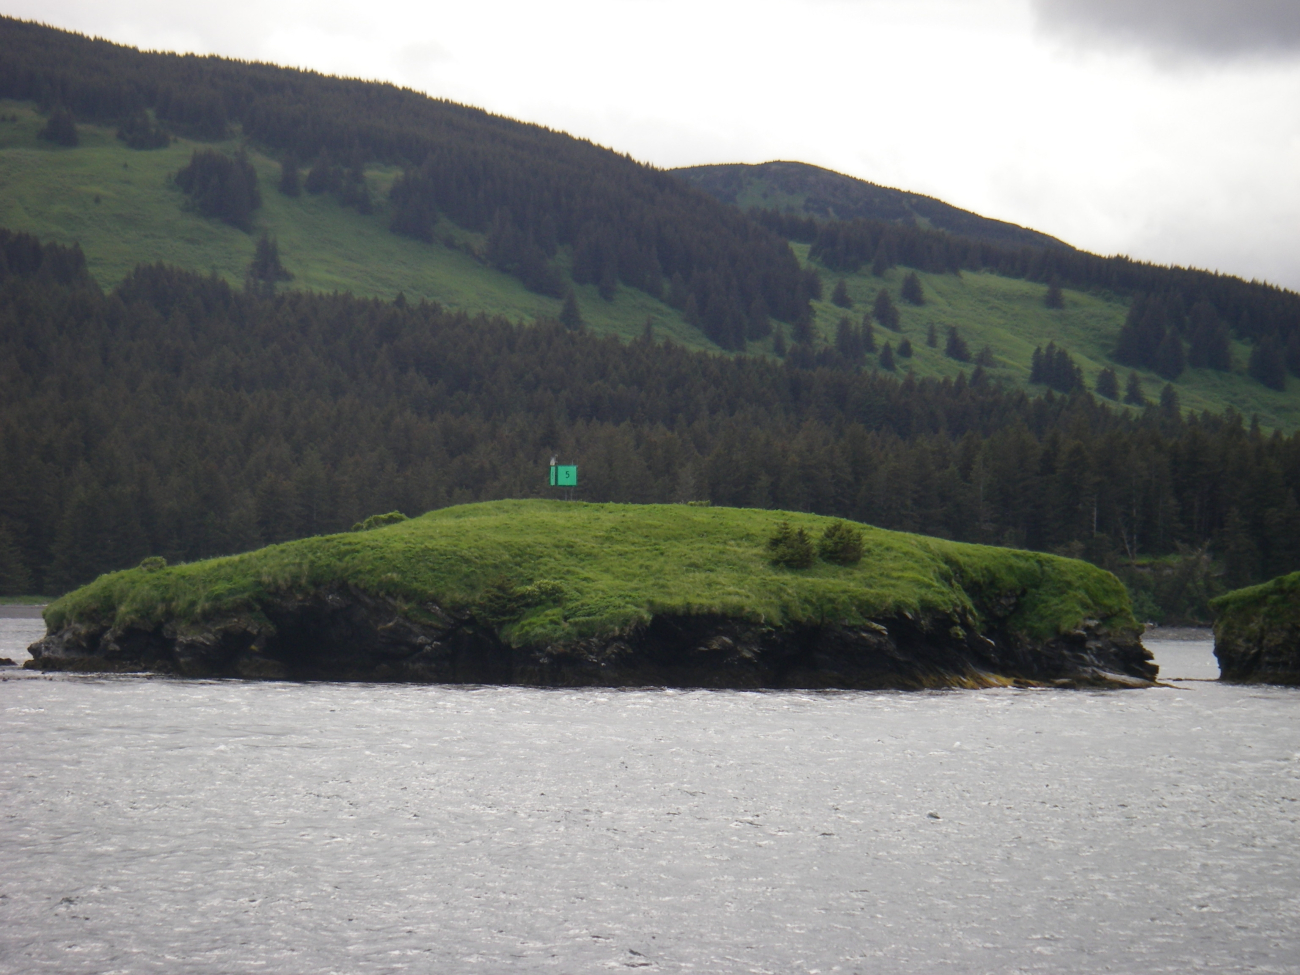 A navigation aid in Whale Pass